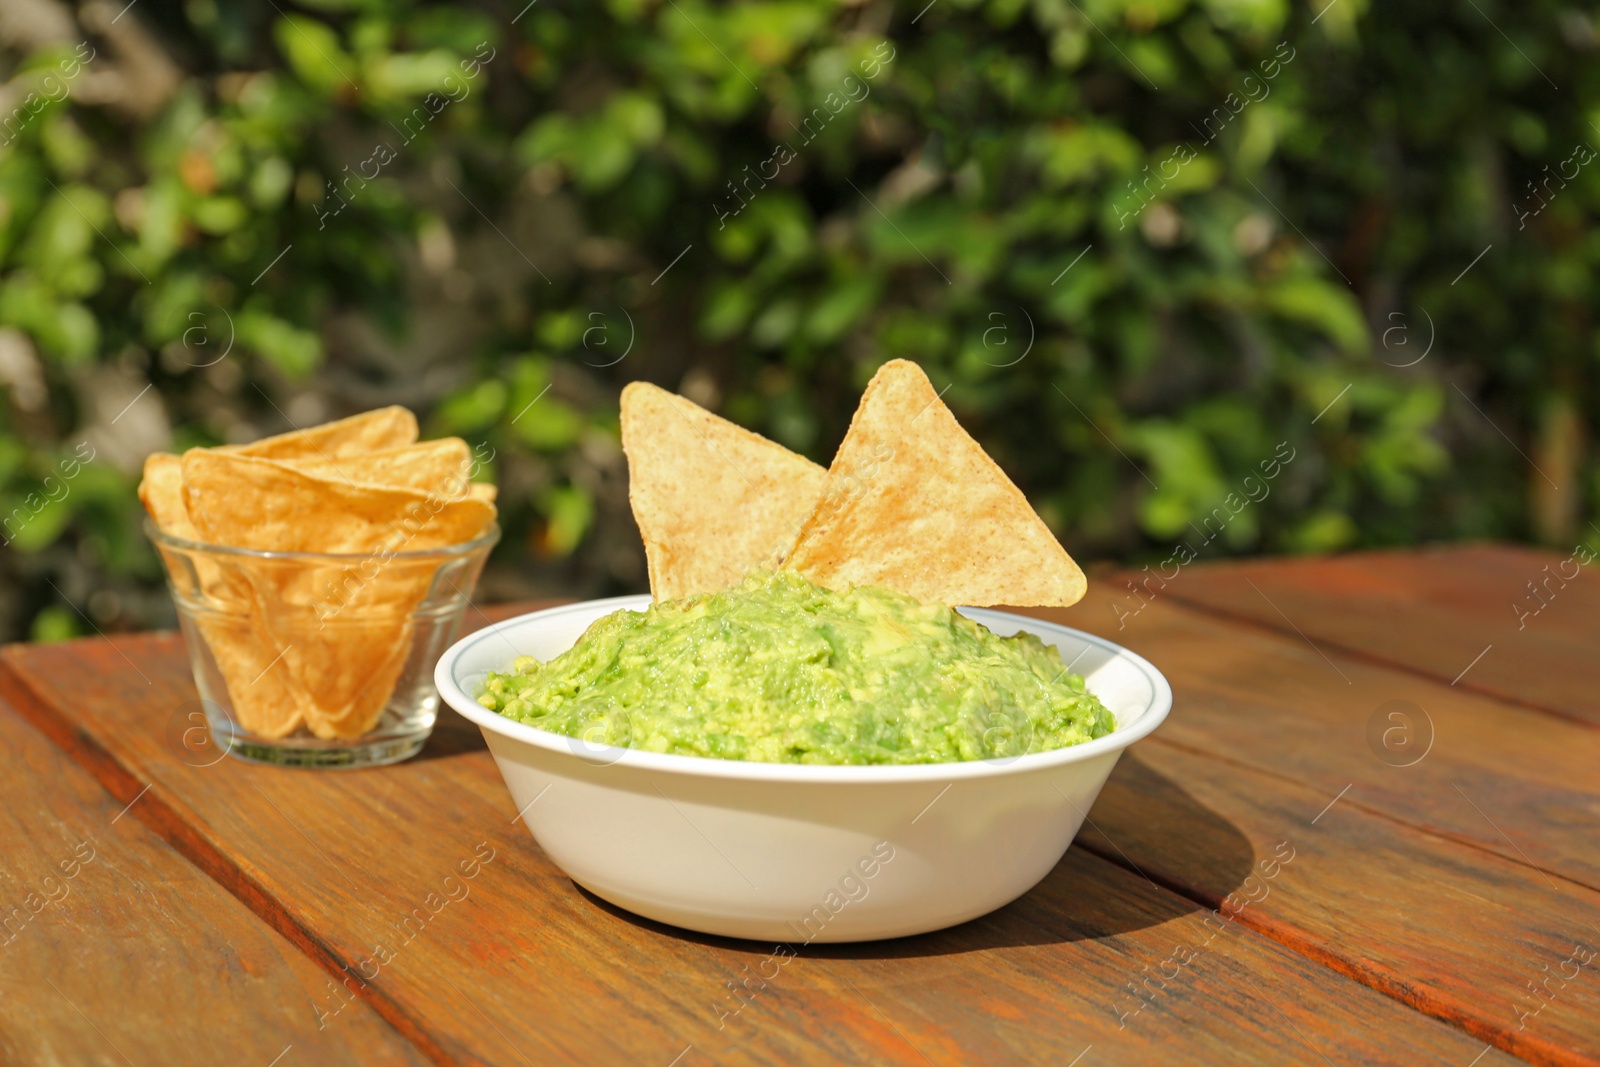 Photo of Delicious guacamole made of avocados with nachos on wooden table outdoors